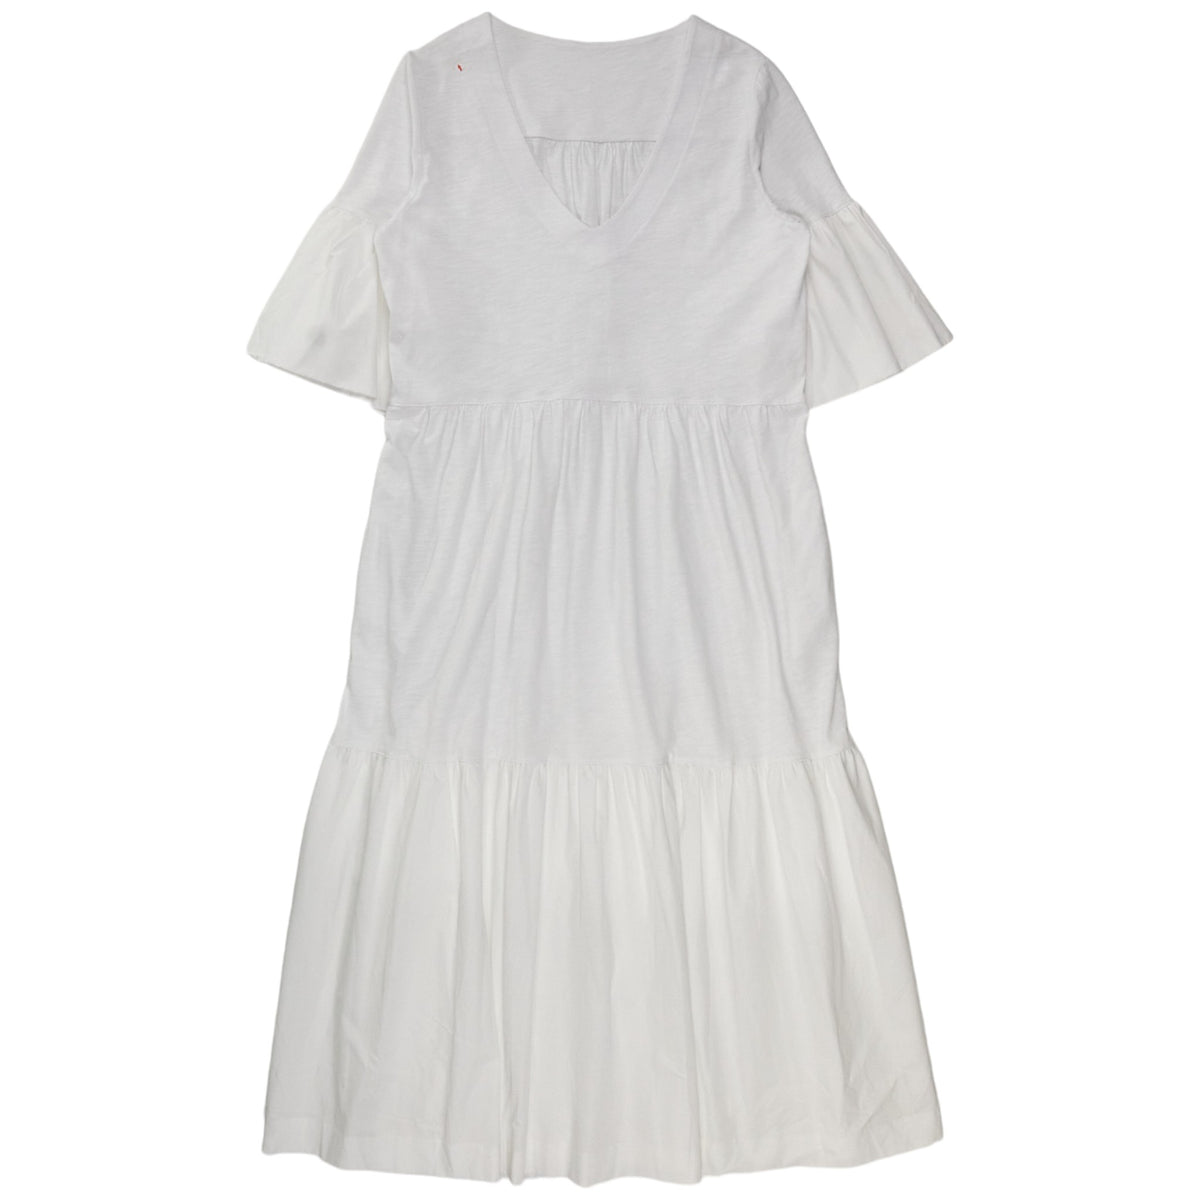 NRBY White Tiered Jersey Dress